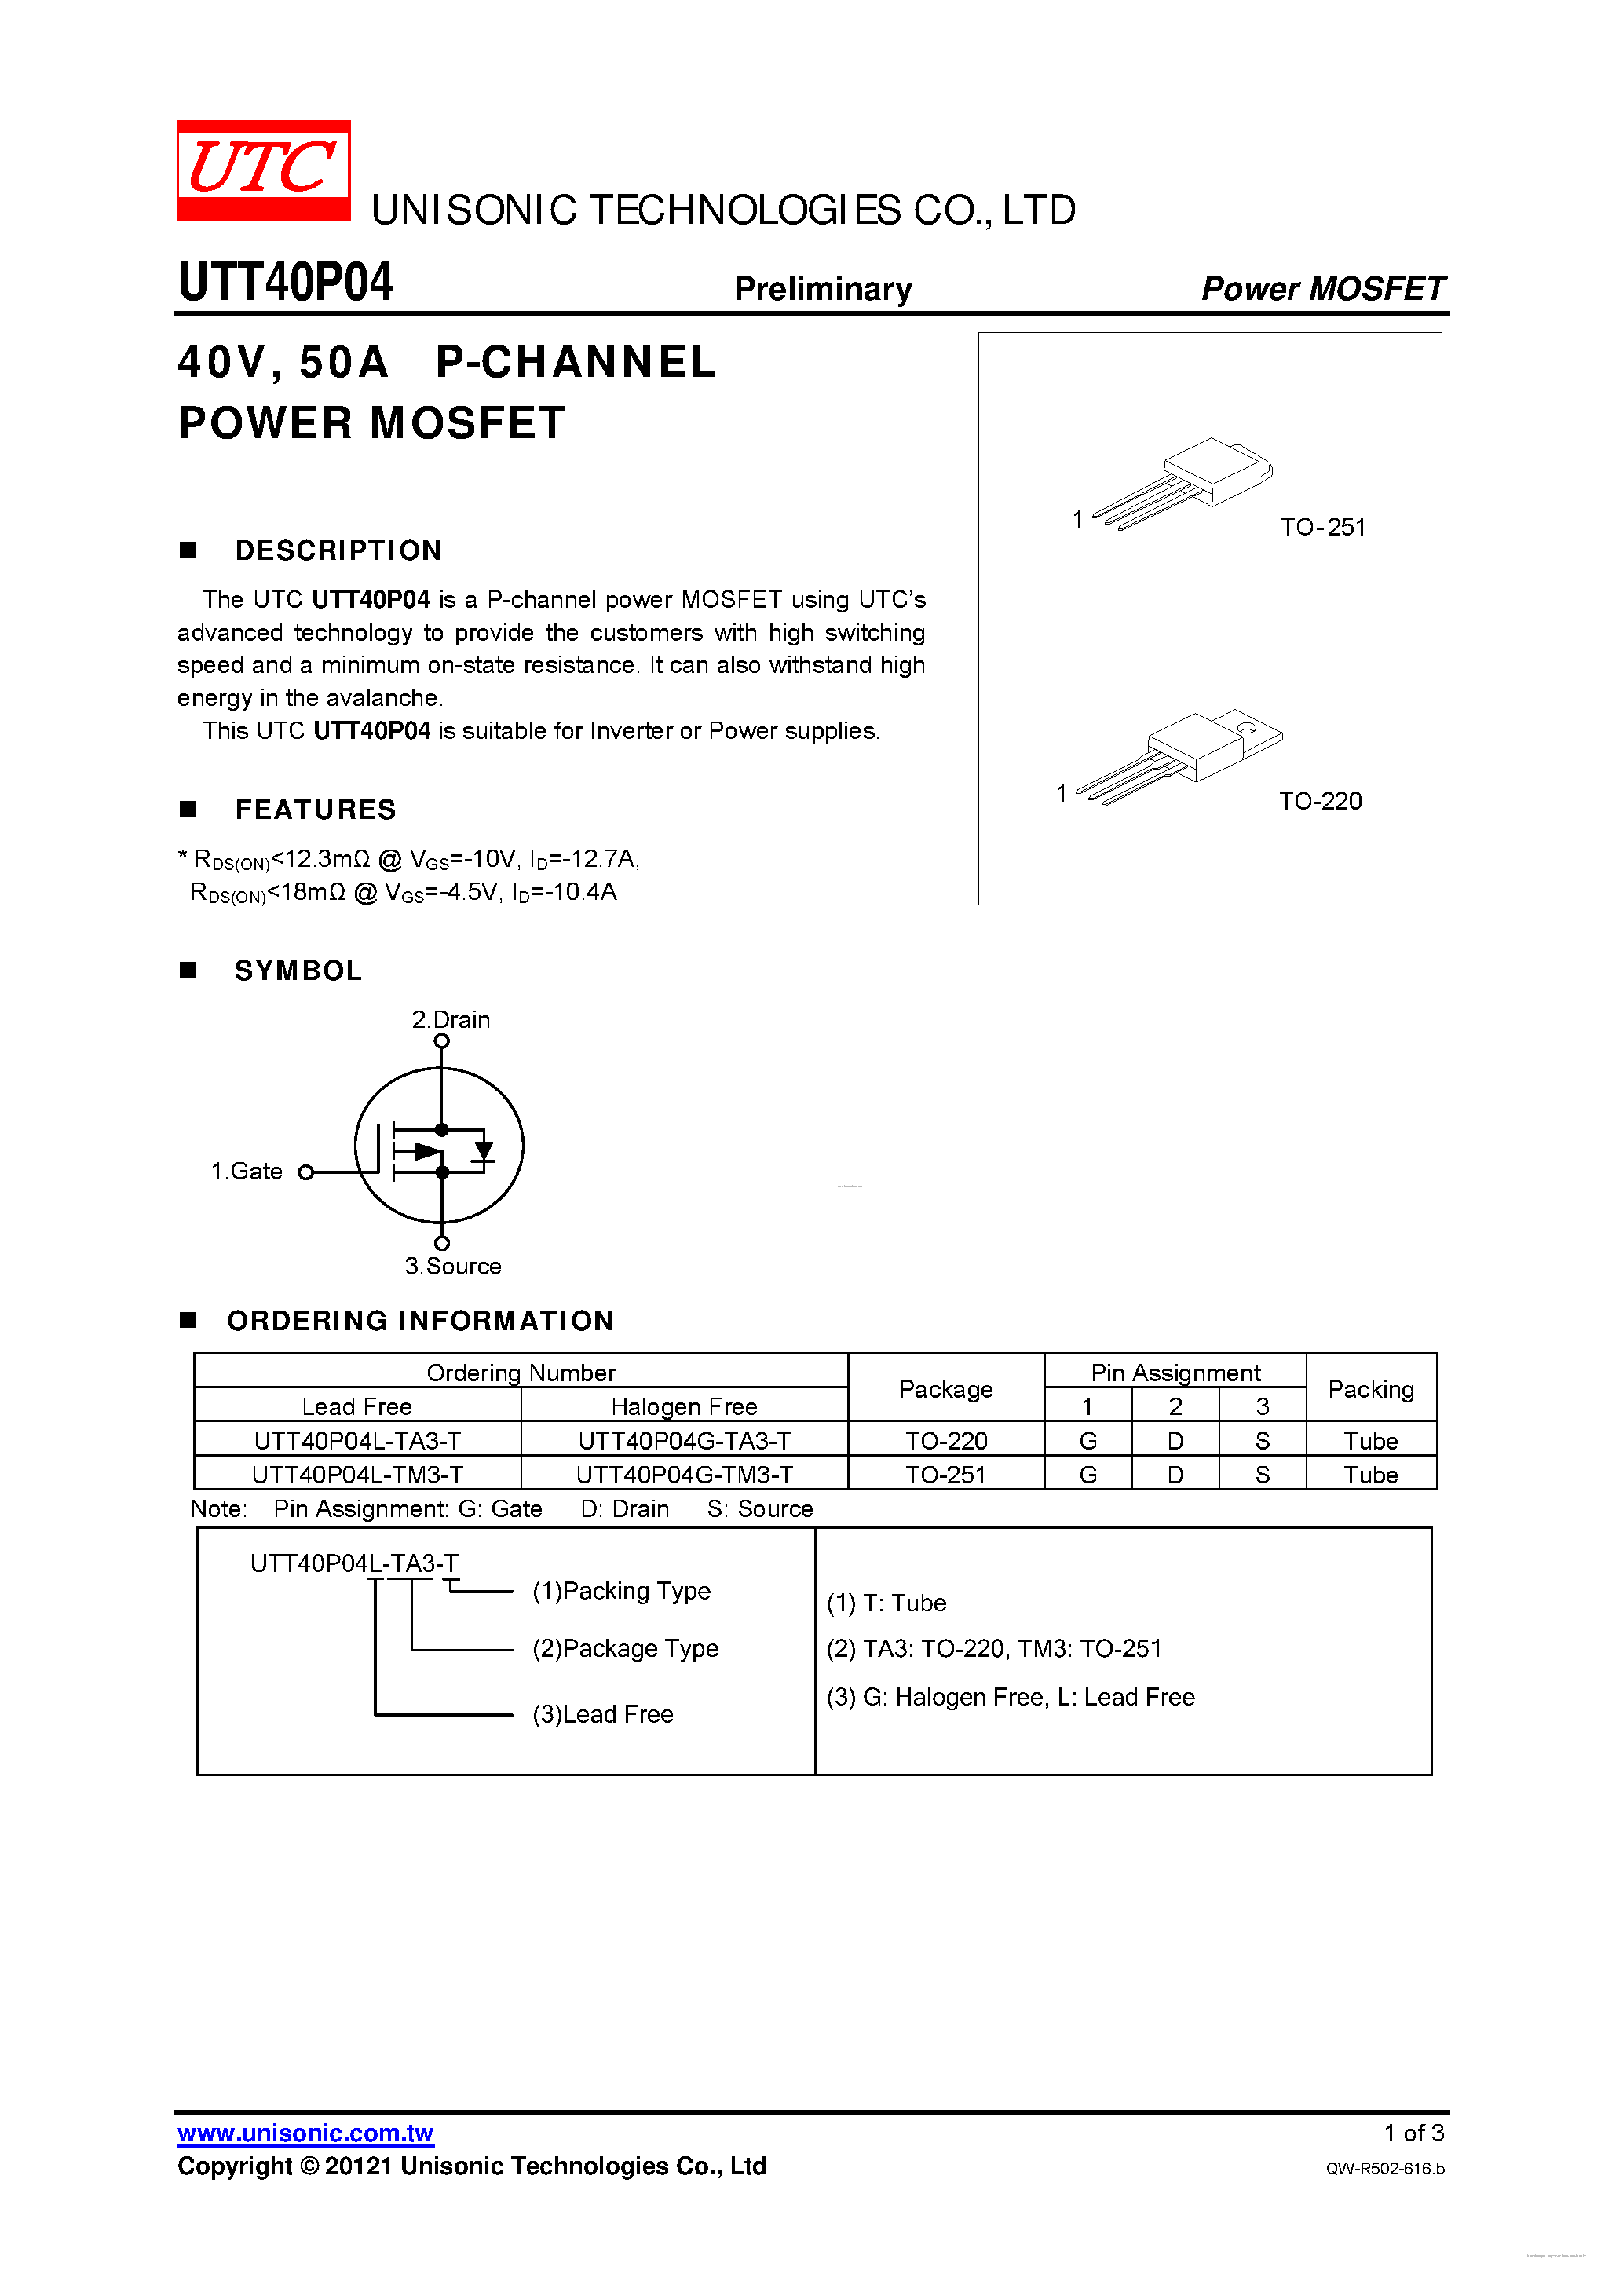 Datasheet UTT40P04 - P-CHANNEL POWER MOSFET page 1